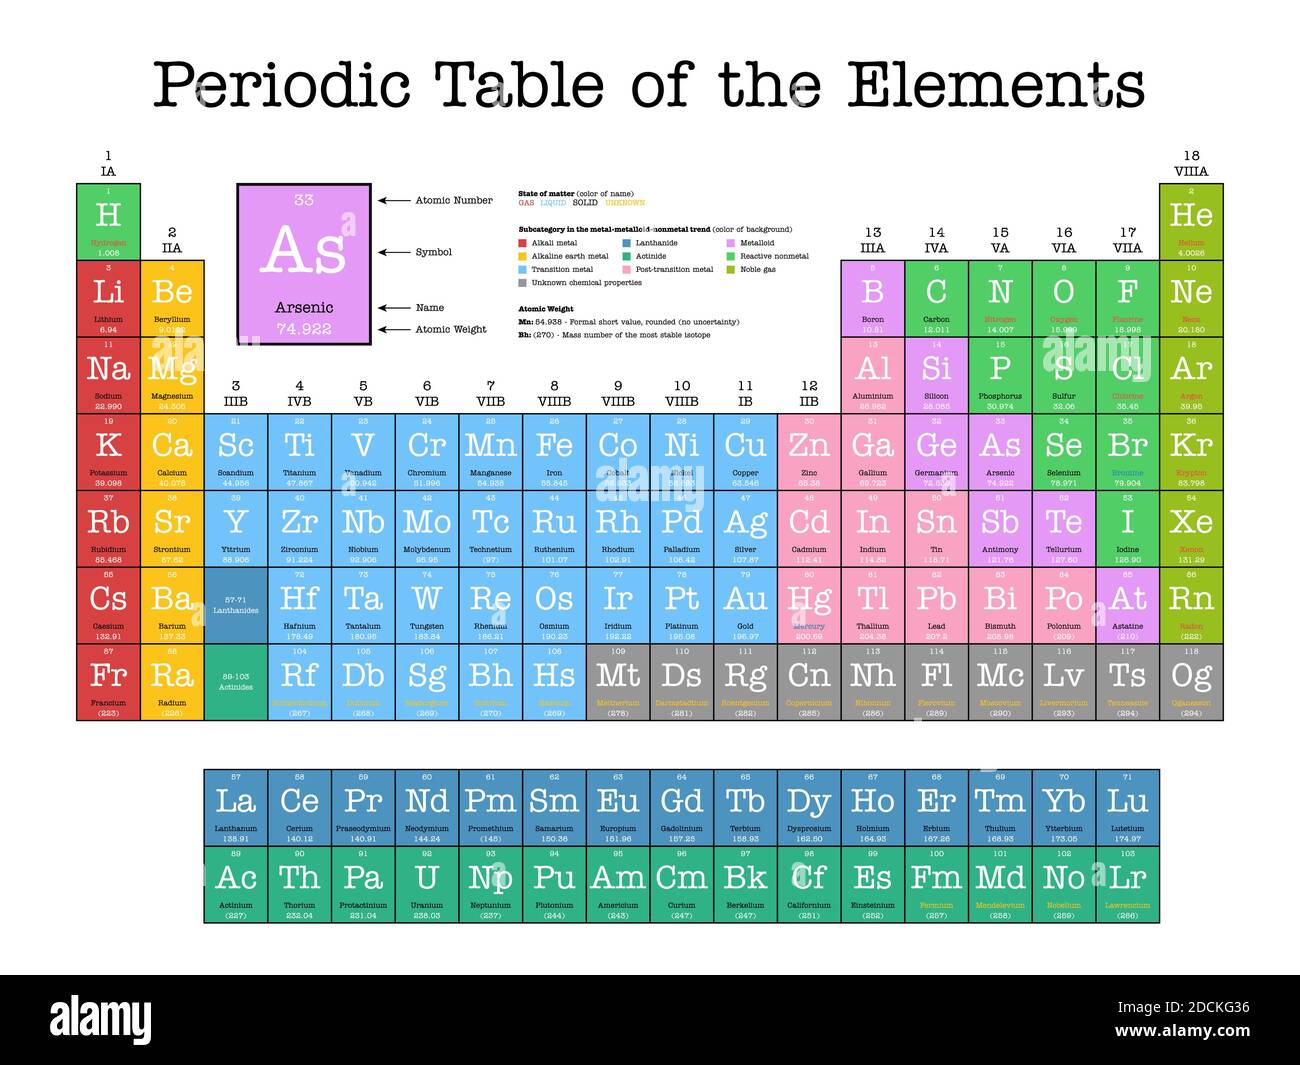 Colorful Periodic Table Of The Elements Shows Atomic Number Symbol Name Atomic Weight 0123